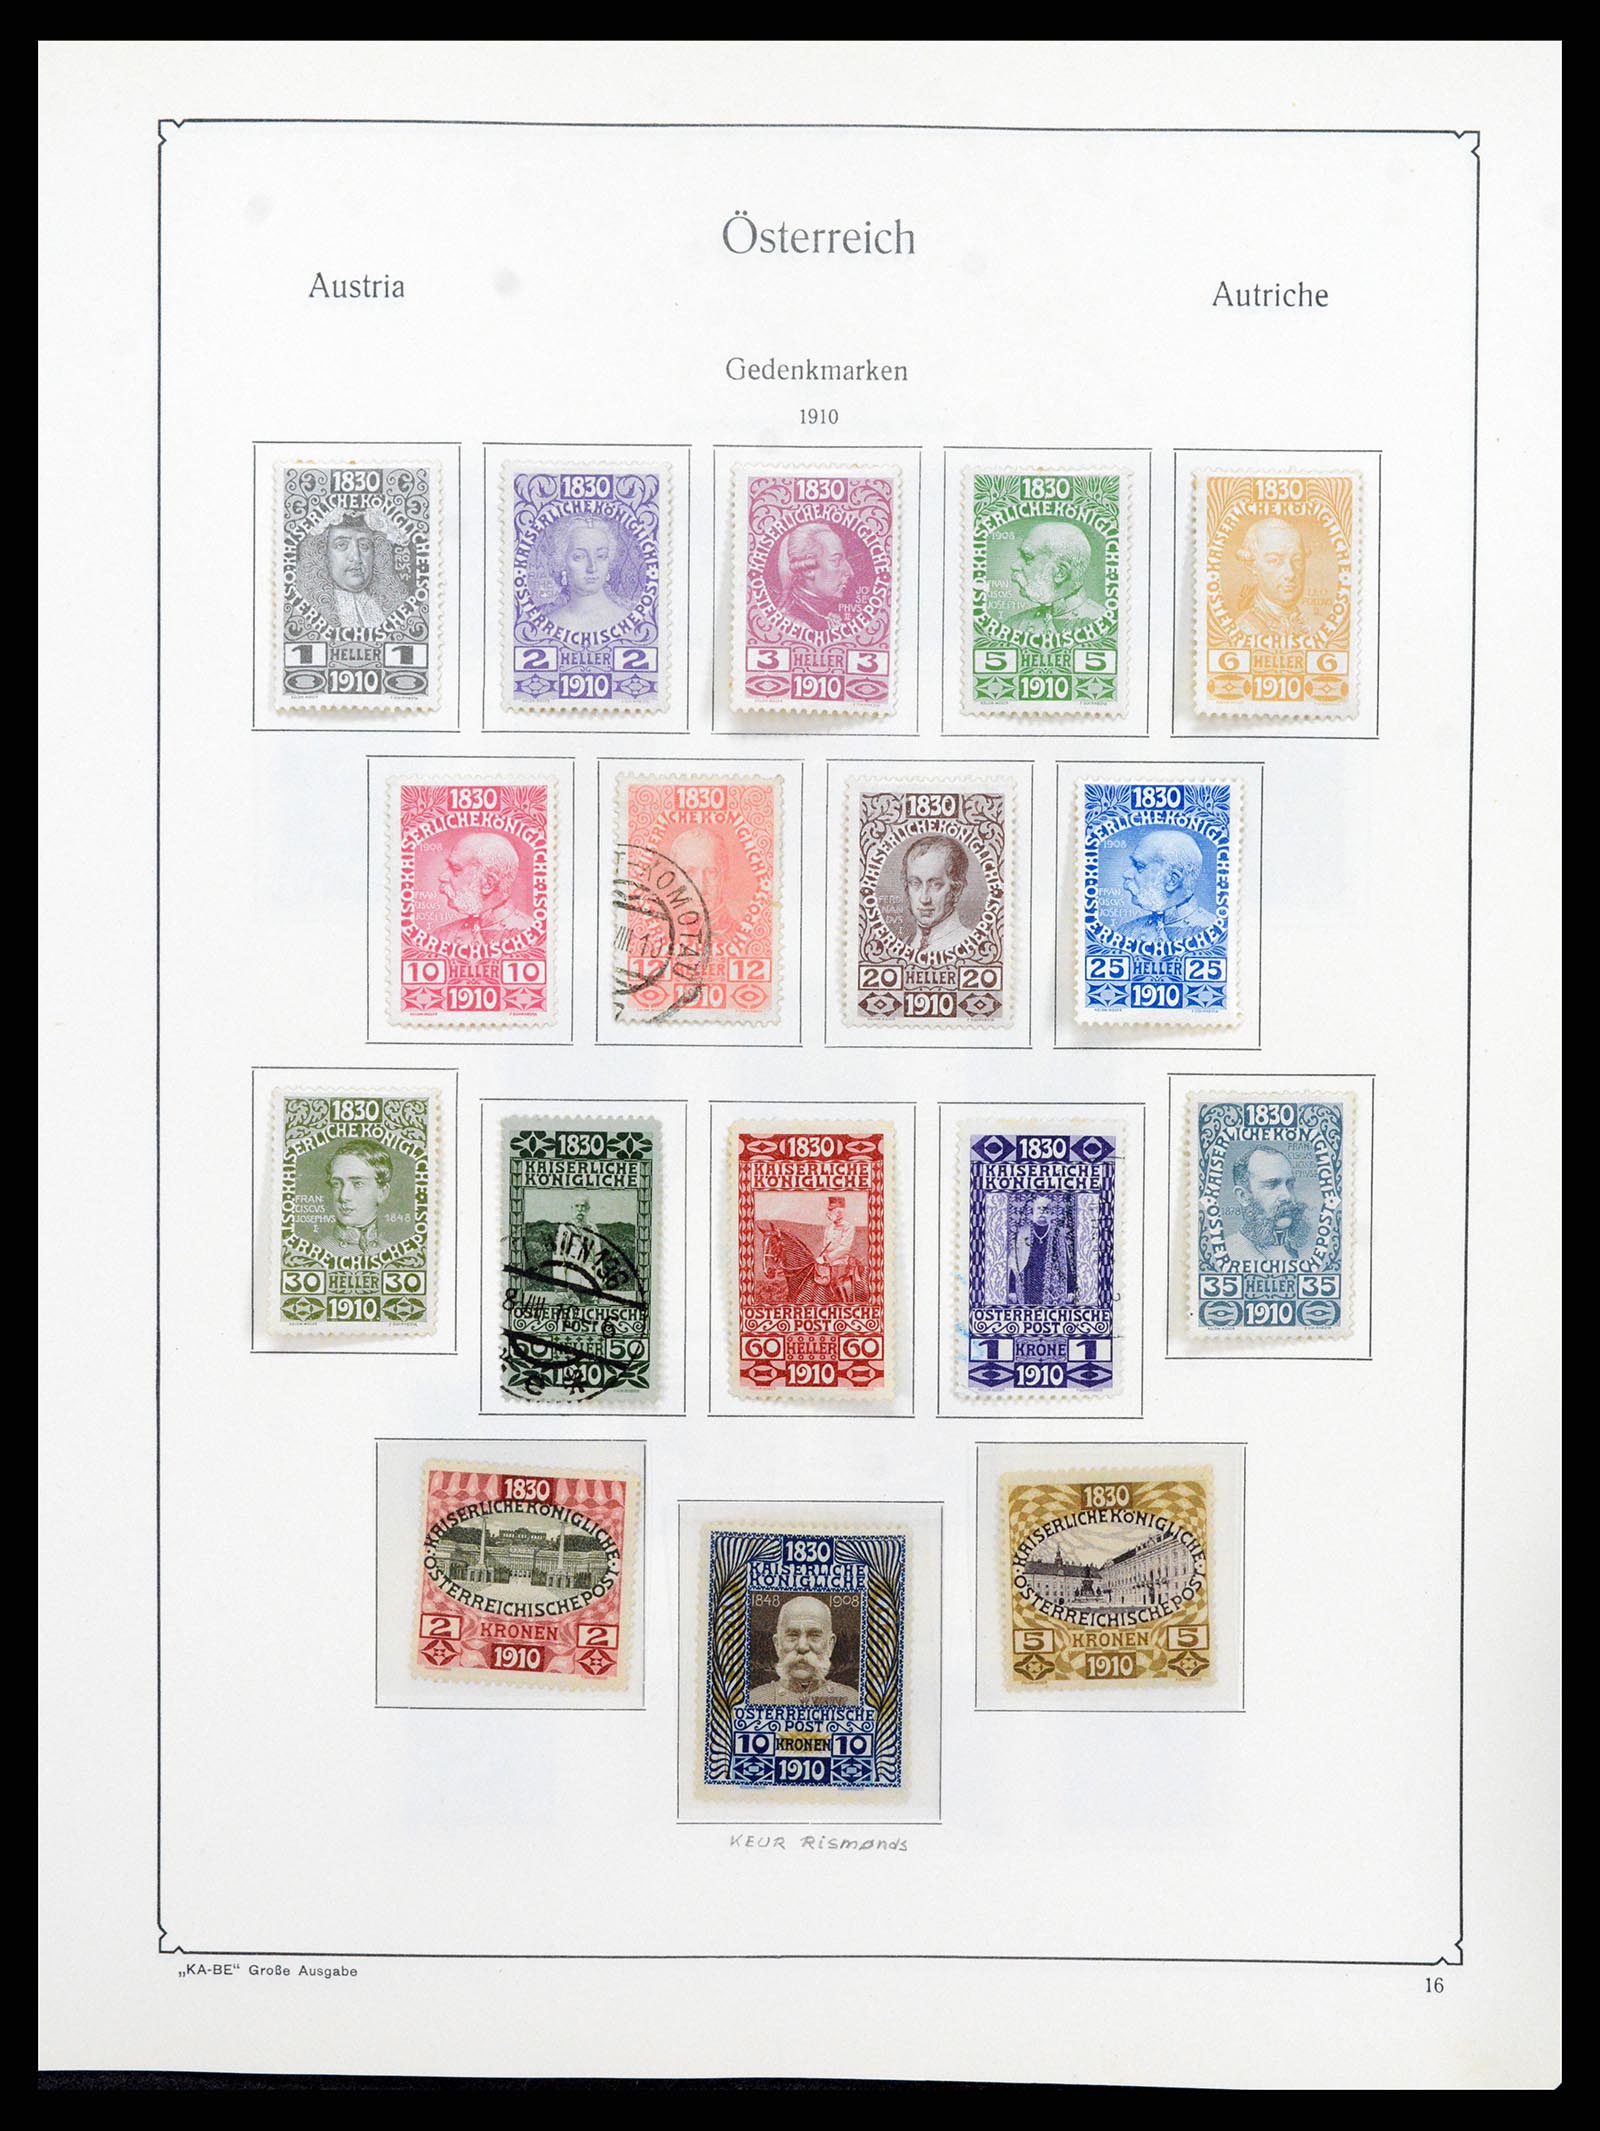 37960 021 - Stamp collection 37960 Austria and territories 1850-1984.